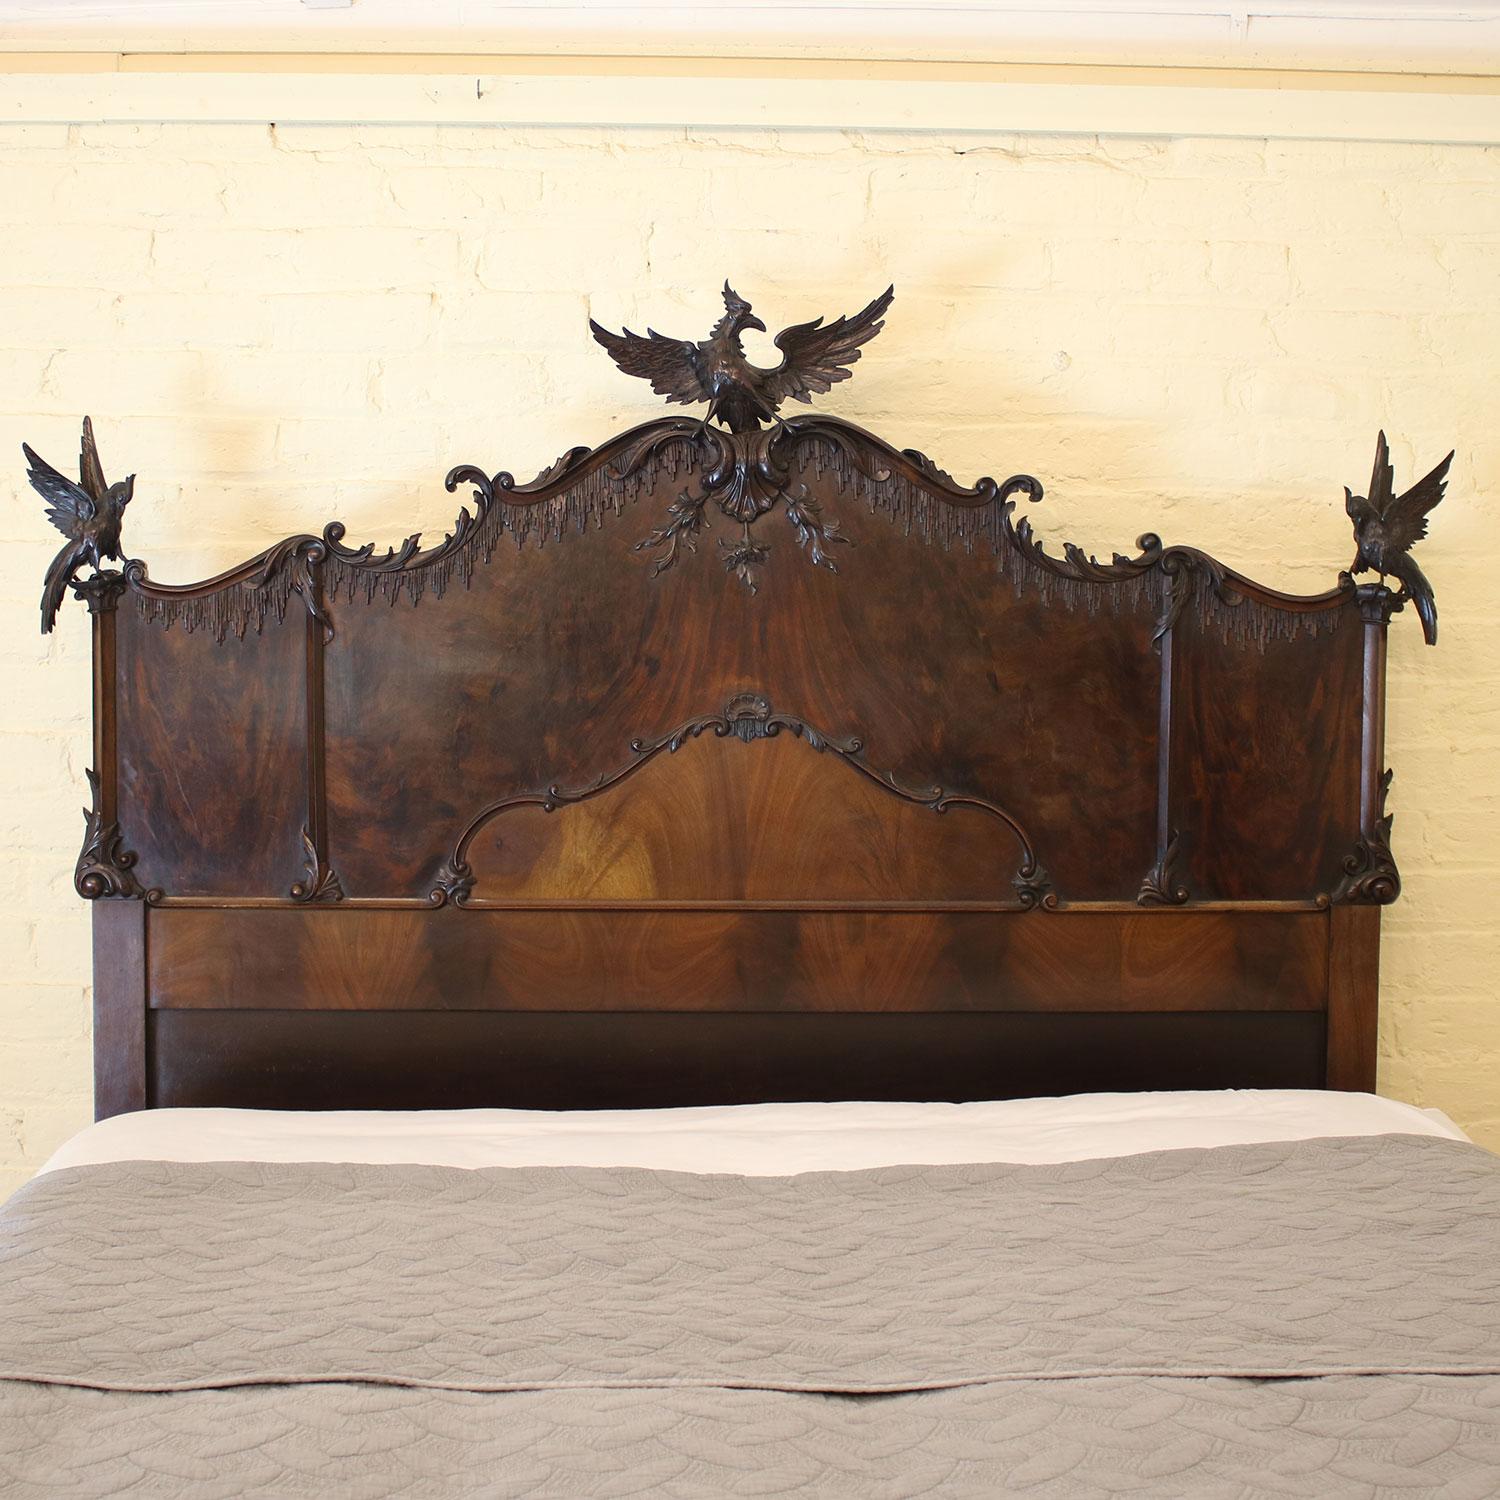 A Chippendale Revival bed from the early 20th century. The tall headboard is split into three panels of dark flame mahogany veneer and has a shaped top with scroll designs, crowned by three ornately carved birds of prey, possibly mythical eagles.